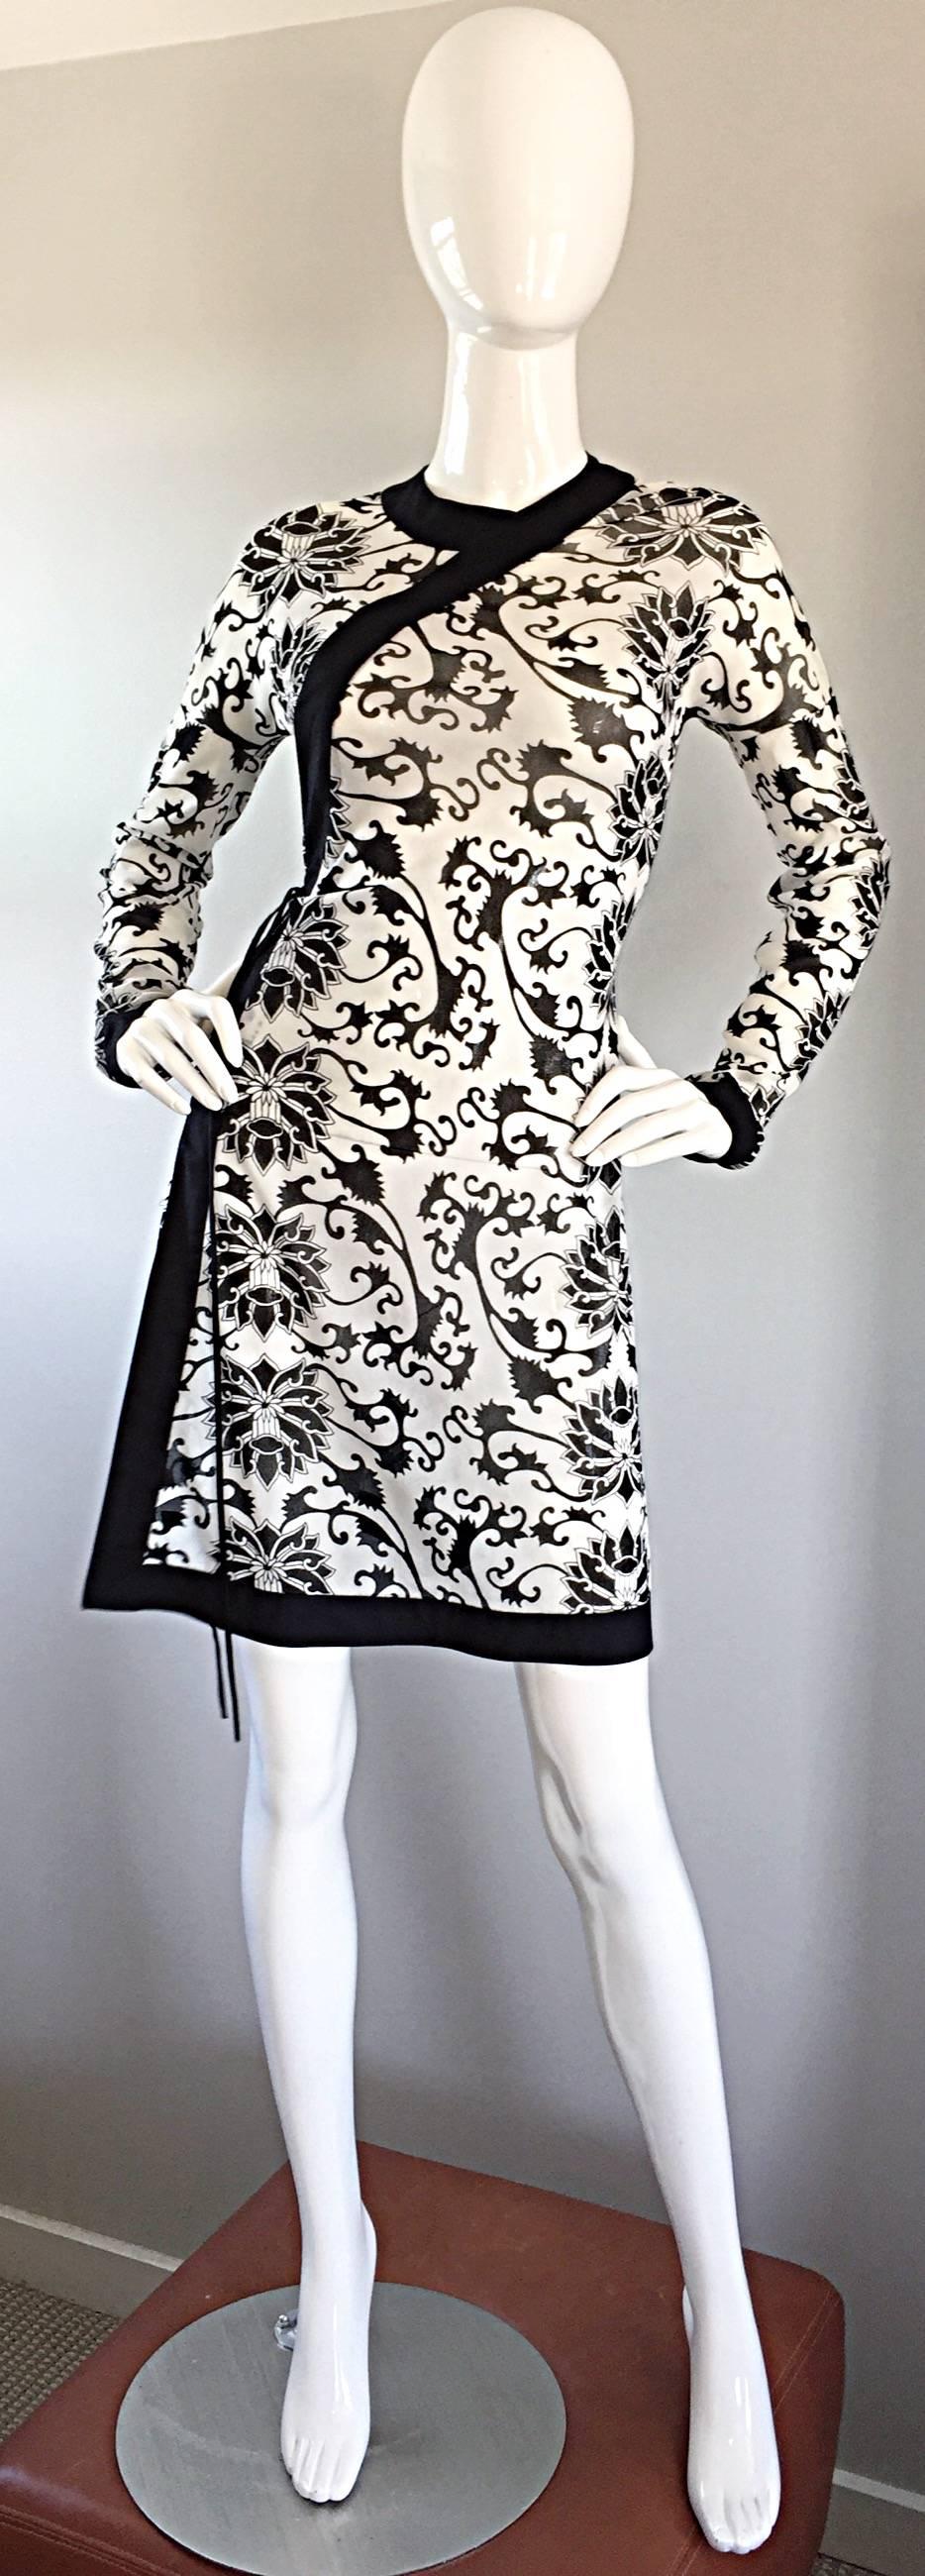 Rare Vintage Vivienne Tam Black and White Tattoo Print Asian Inspired Wrap Dress For Sale 1